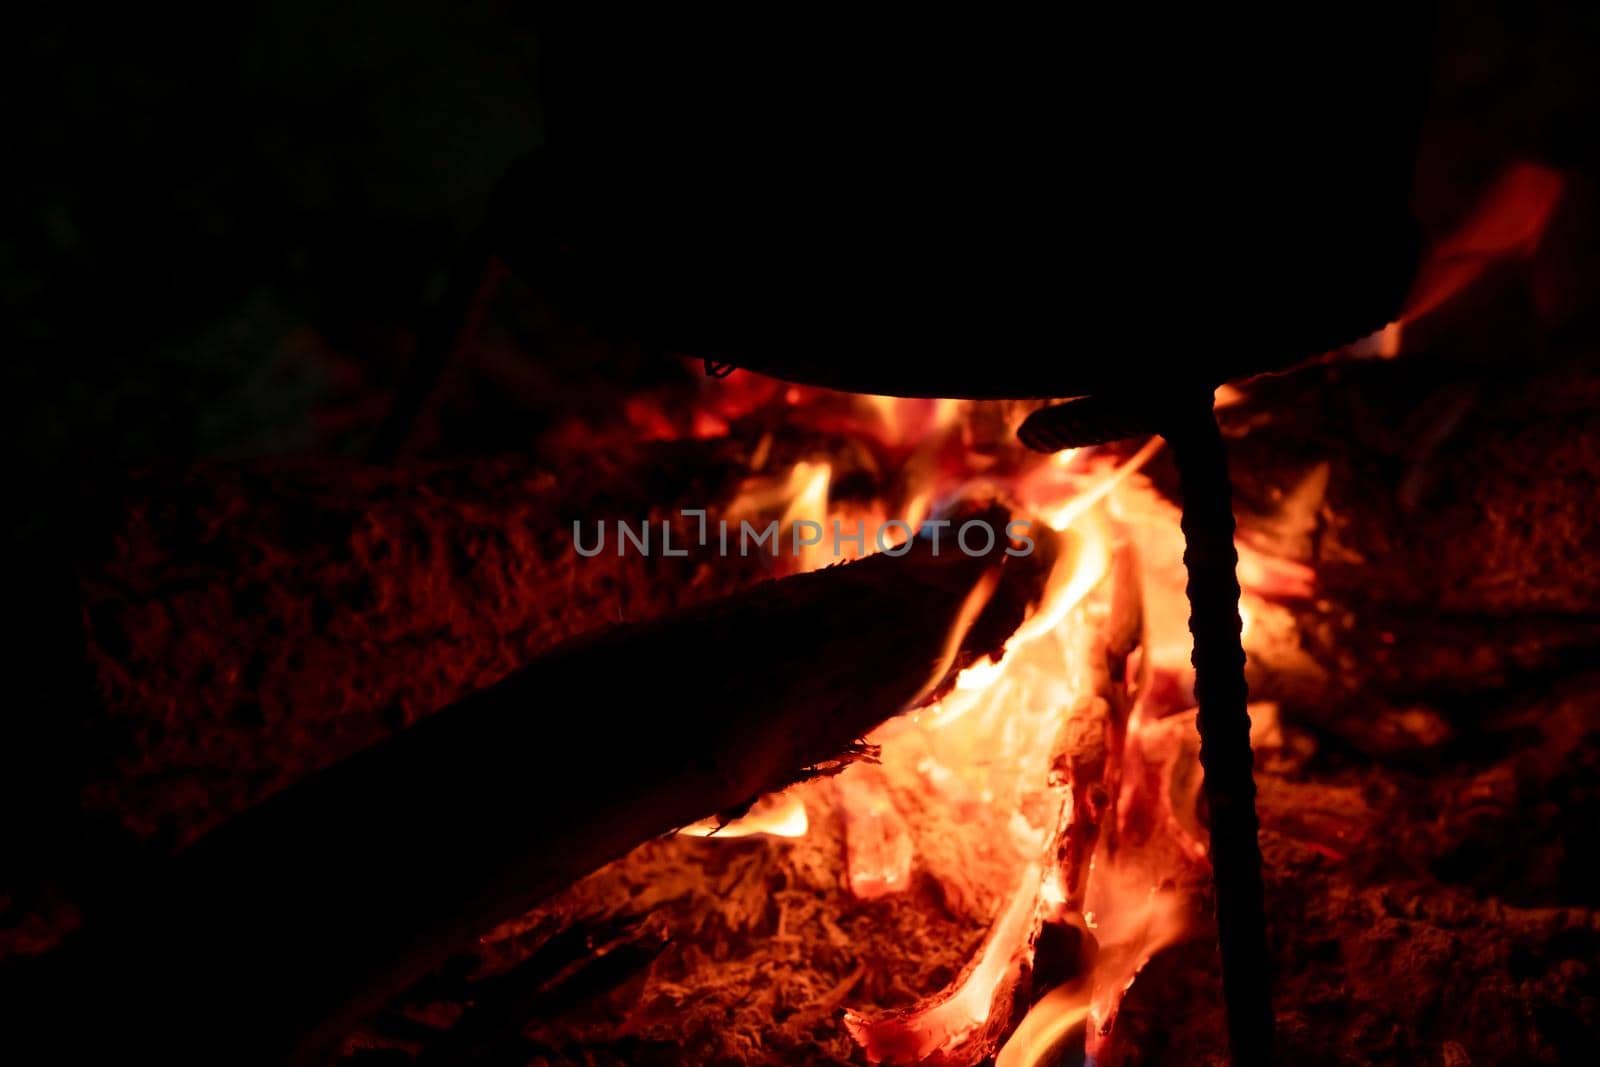 Food cooking on a bonfire at night. Firewood solid fuel for cook at campfire. Fire with orange flame on dark background. Burning wood for heating energy. Dinner at camping. Fire to keep warm at camp.